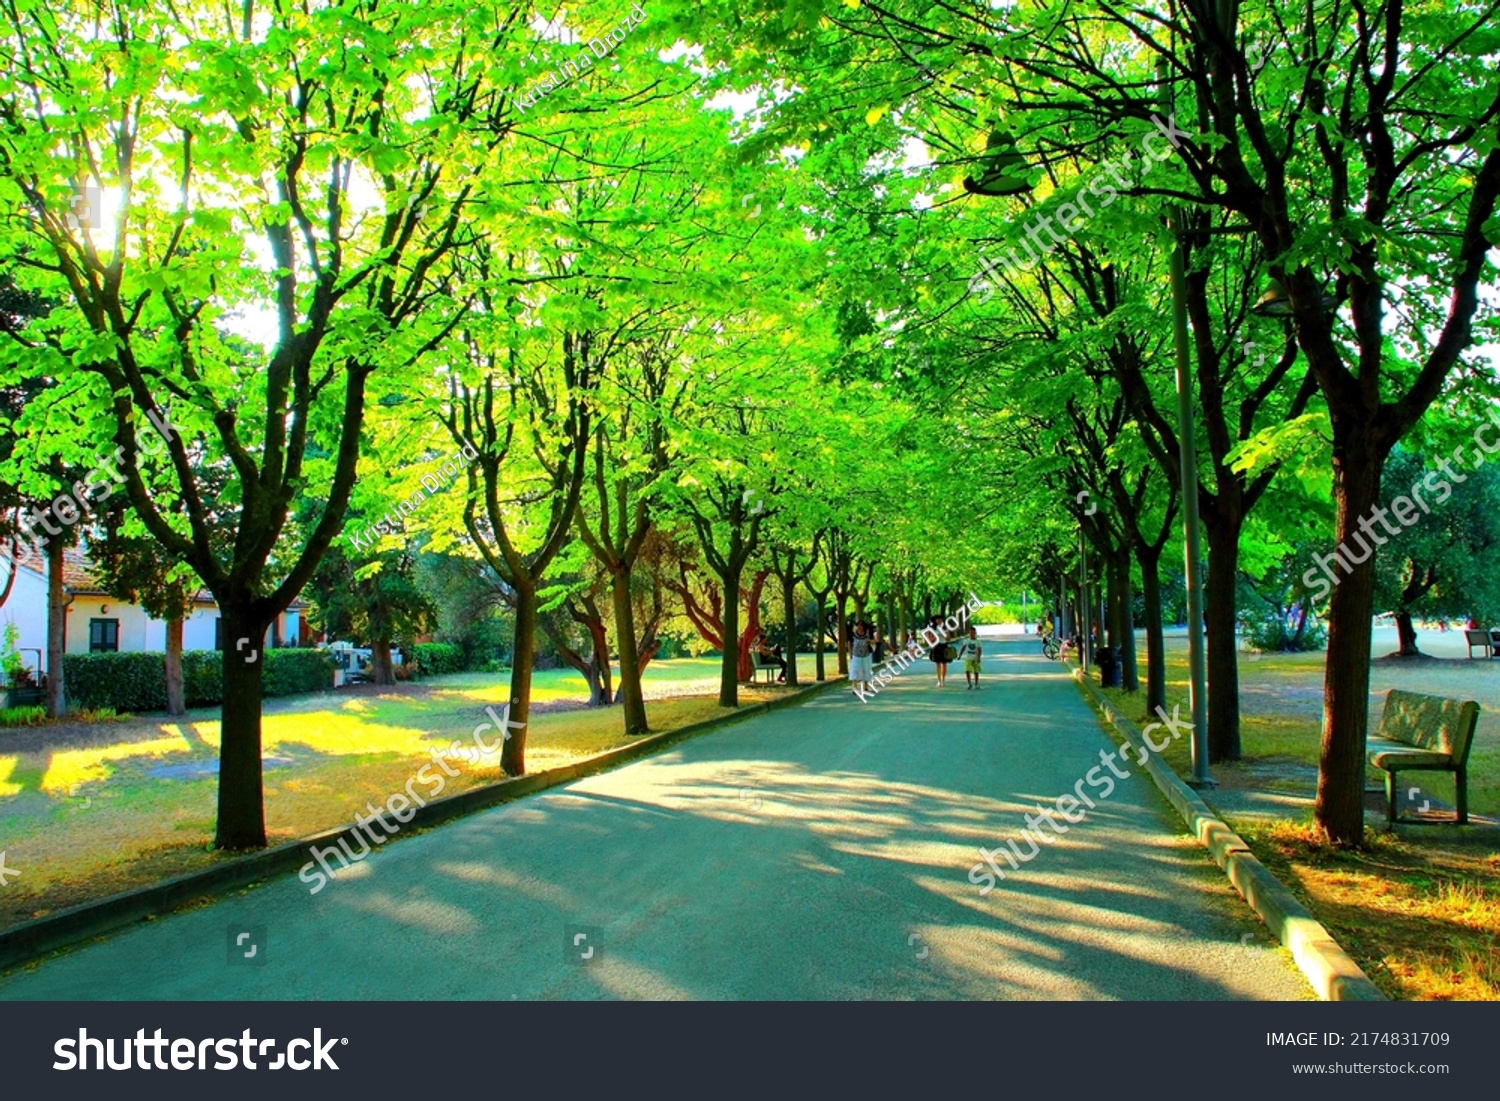 Empyrean scenery from Parco della Repubblica in Sirolo with a wide paved road strolled by different people and rows of splendid green trees on both sides, occasional stone benches, meadows and a hedge #2174831709